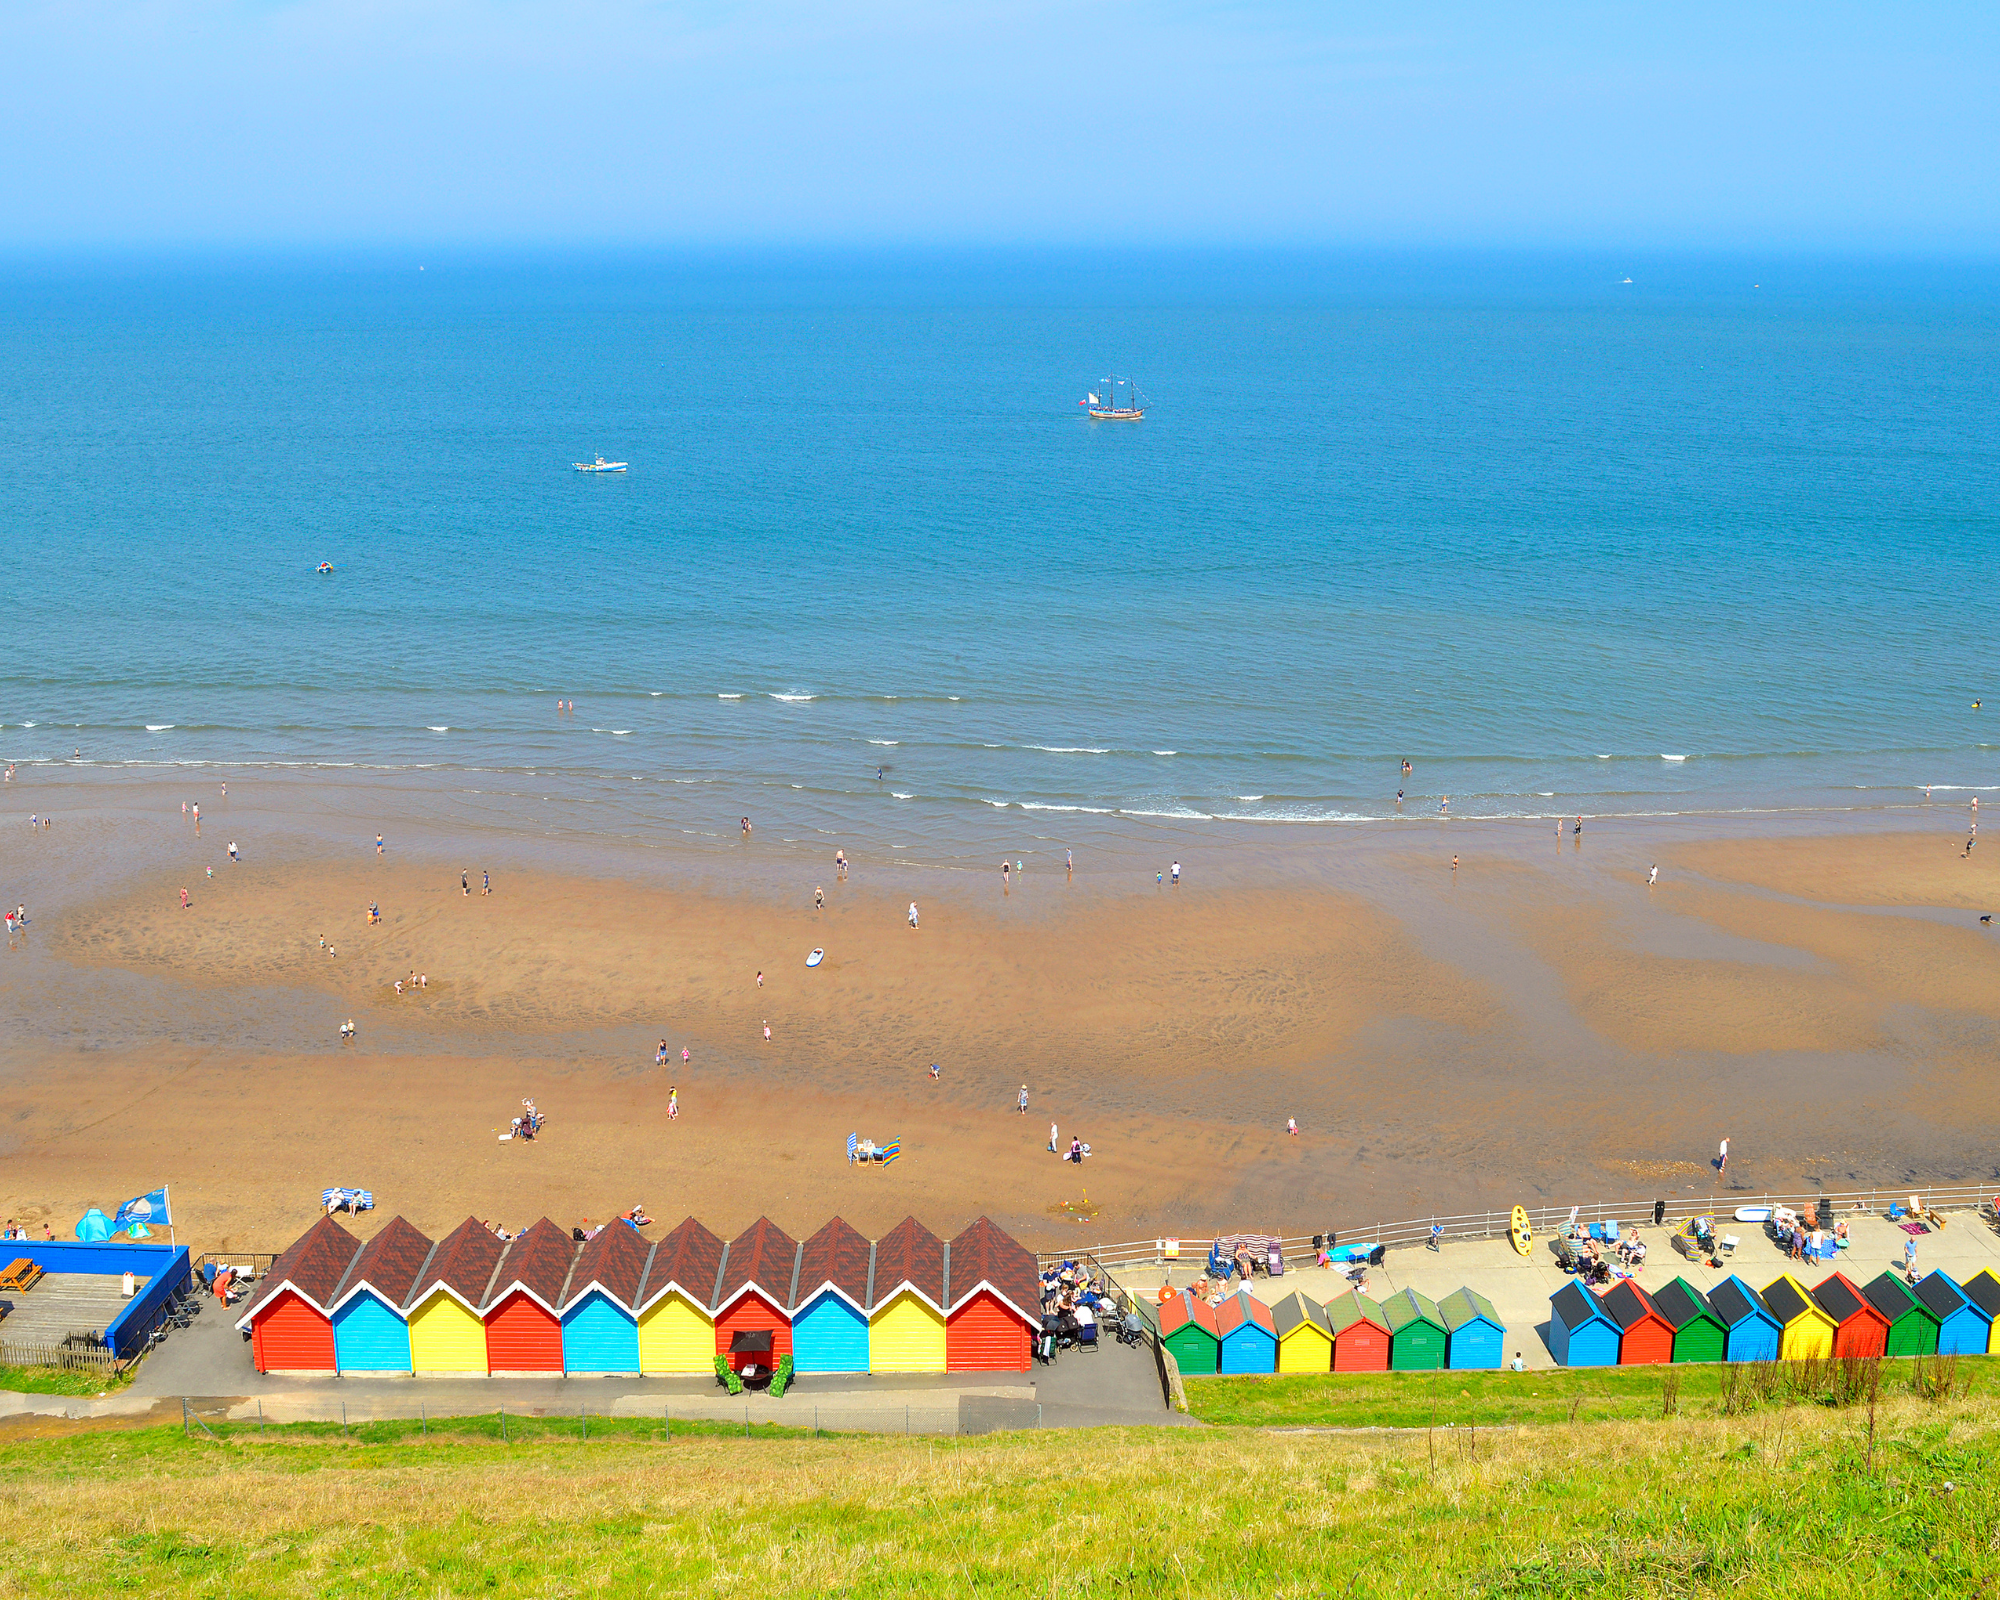 Whitby Beach - Make the most of your beach day